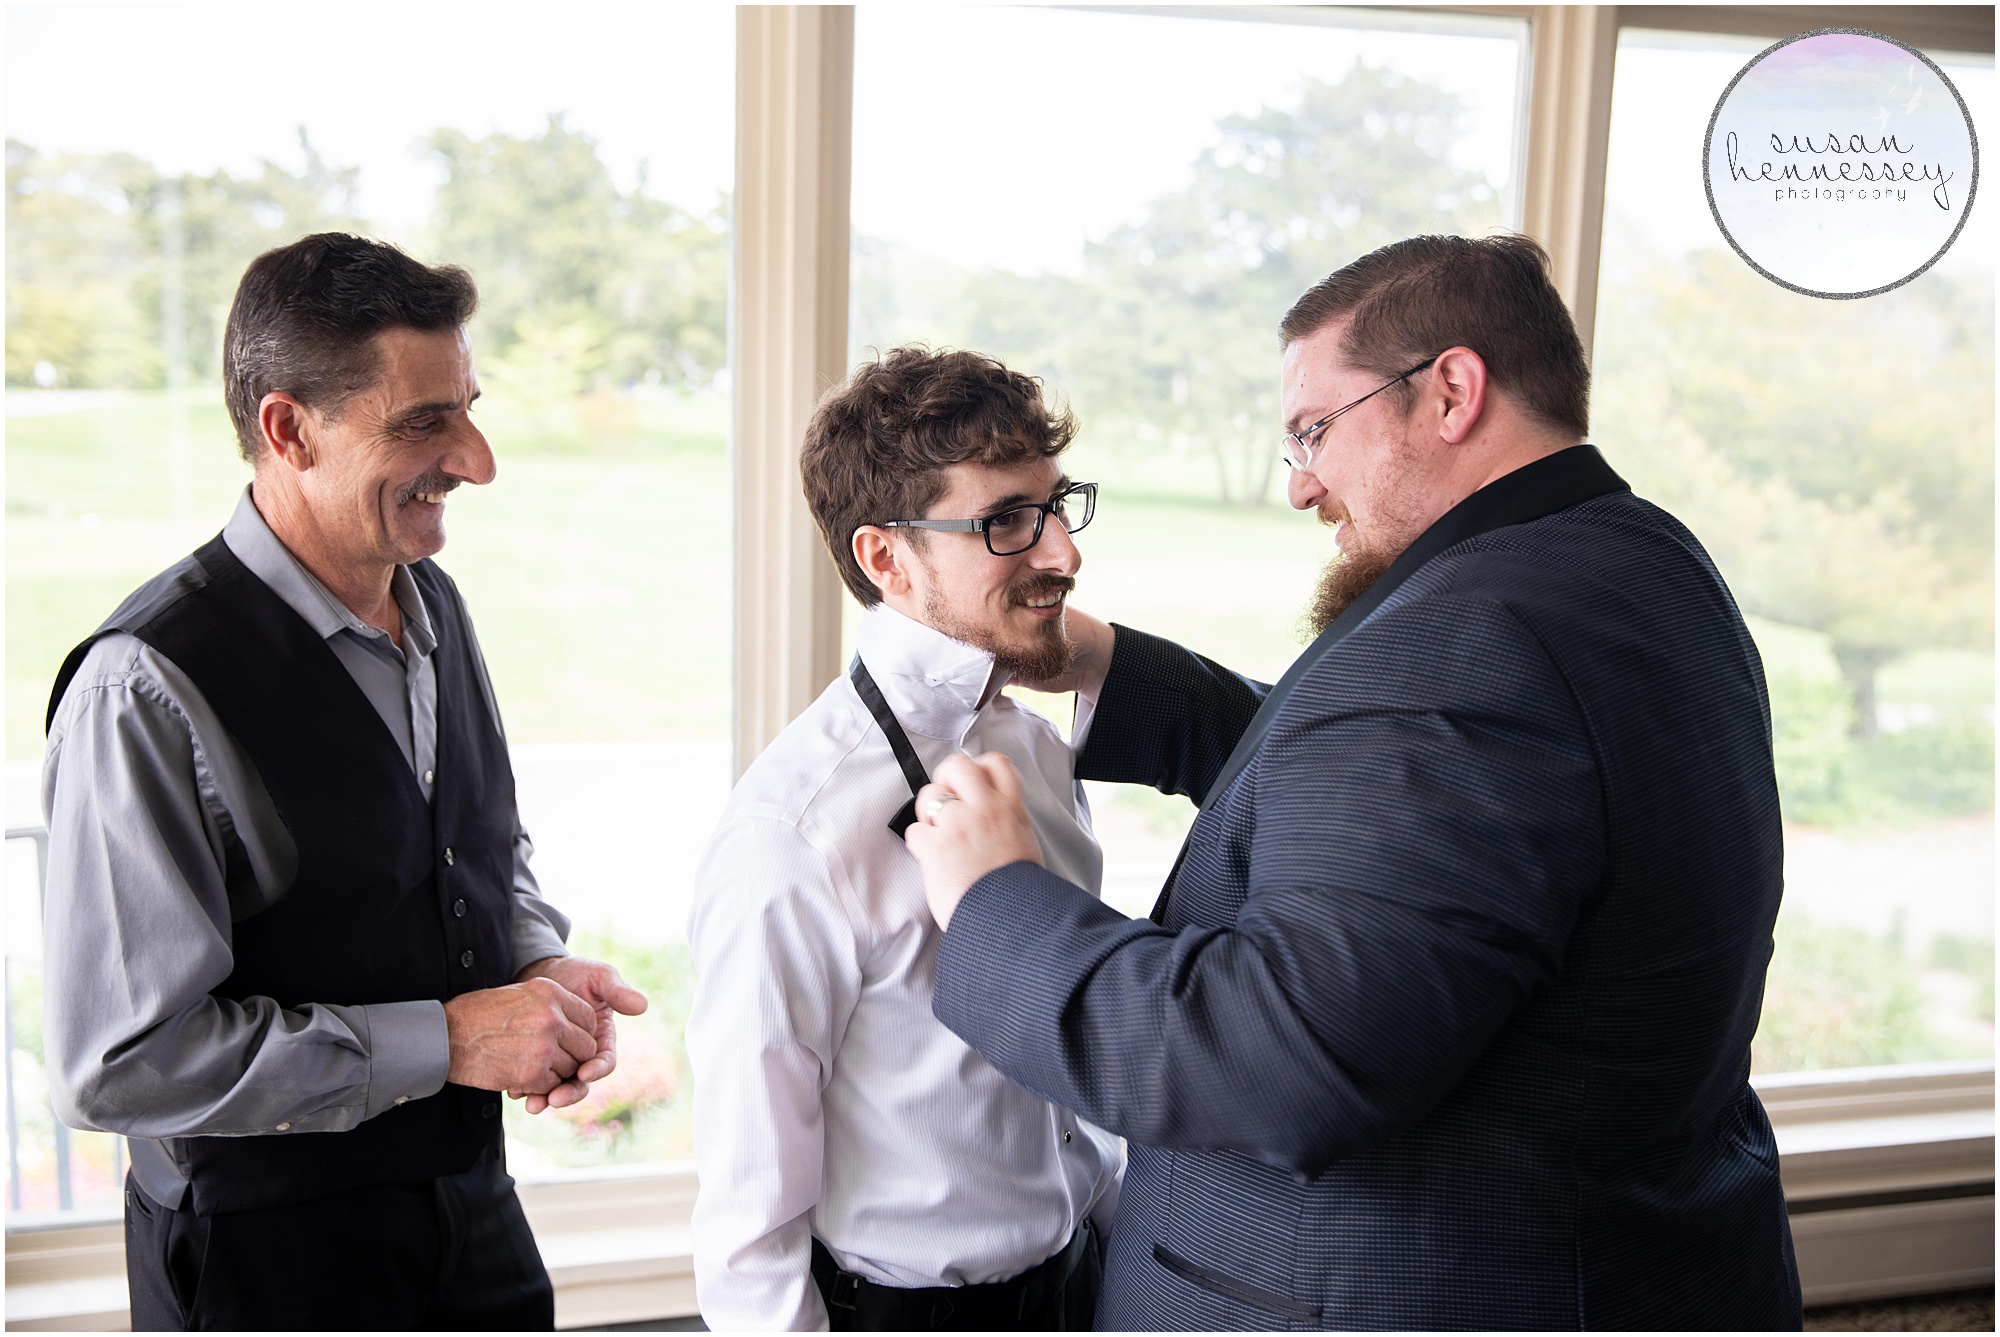 The groom receives help from his father and best man while he gets ready on his wedding day.